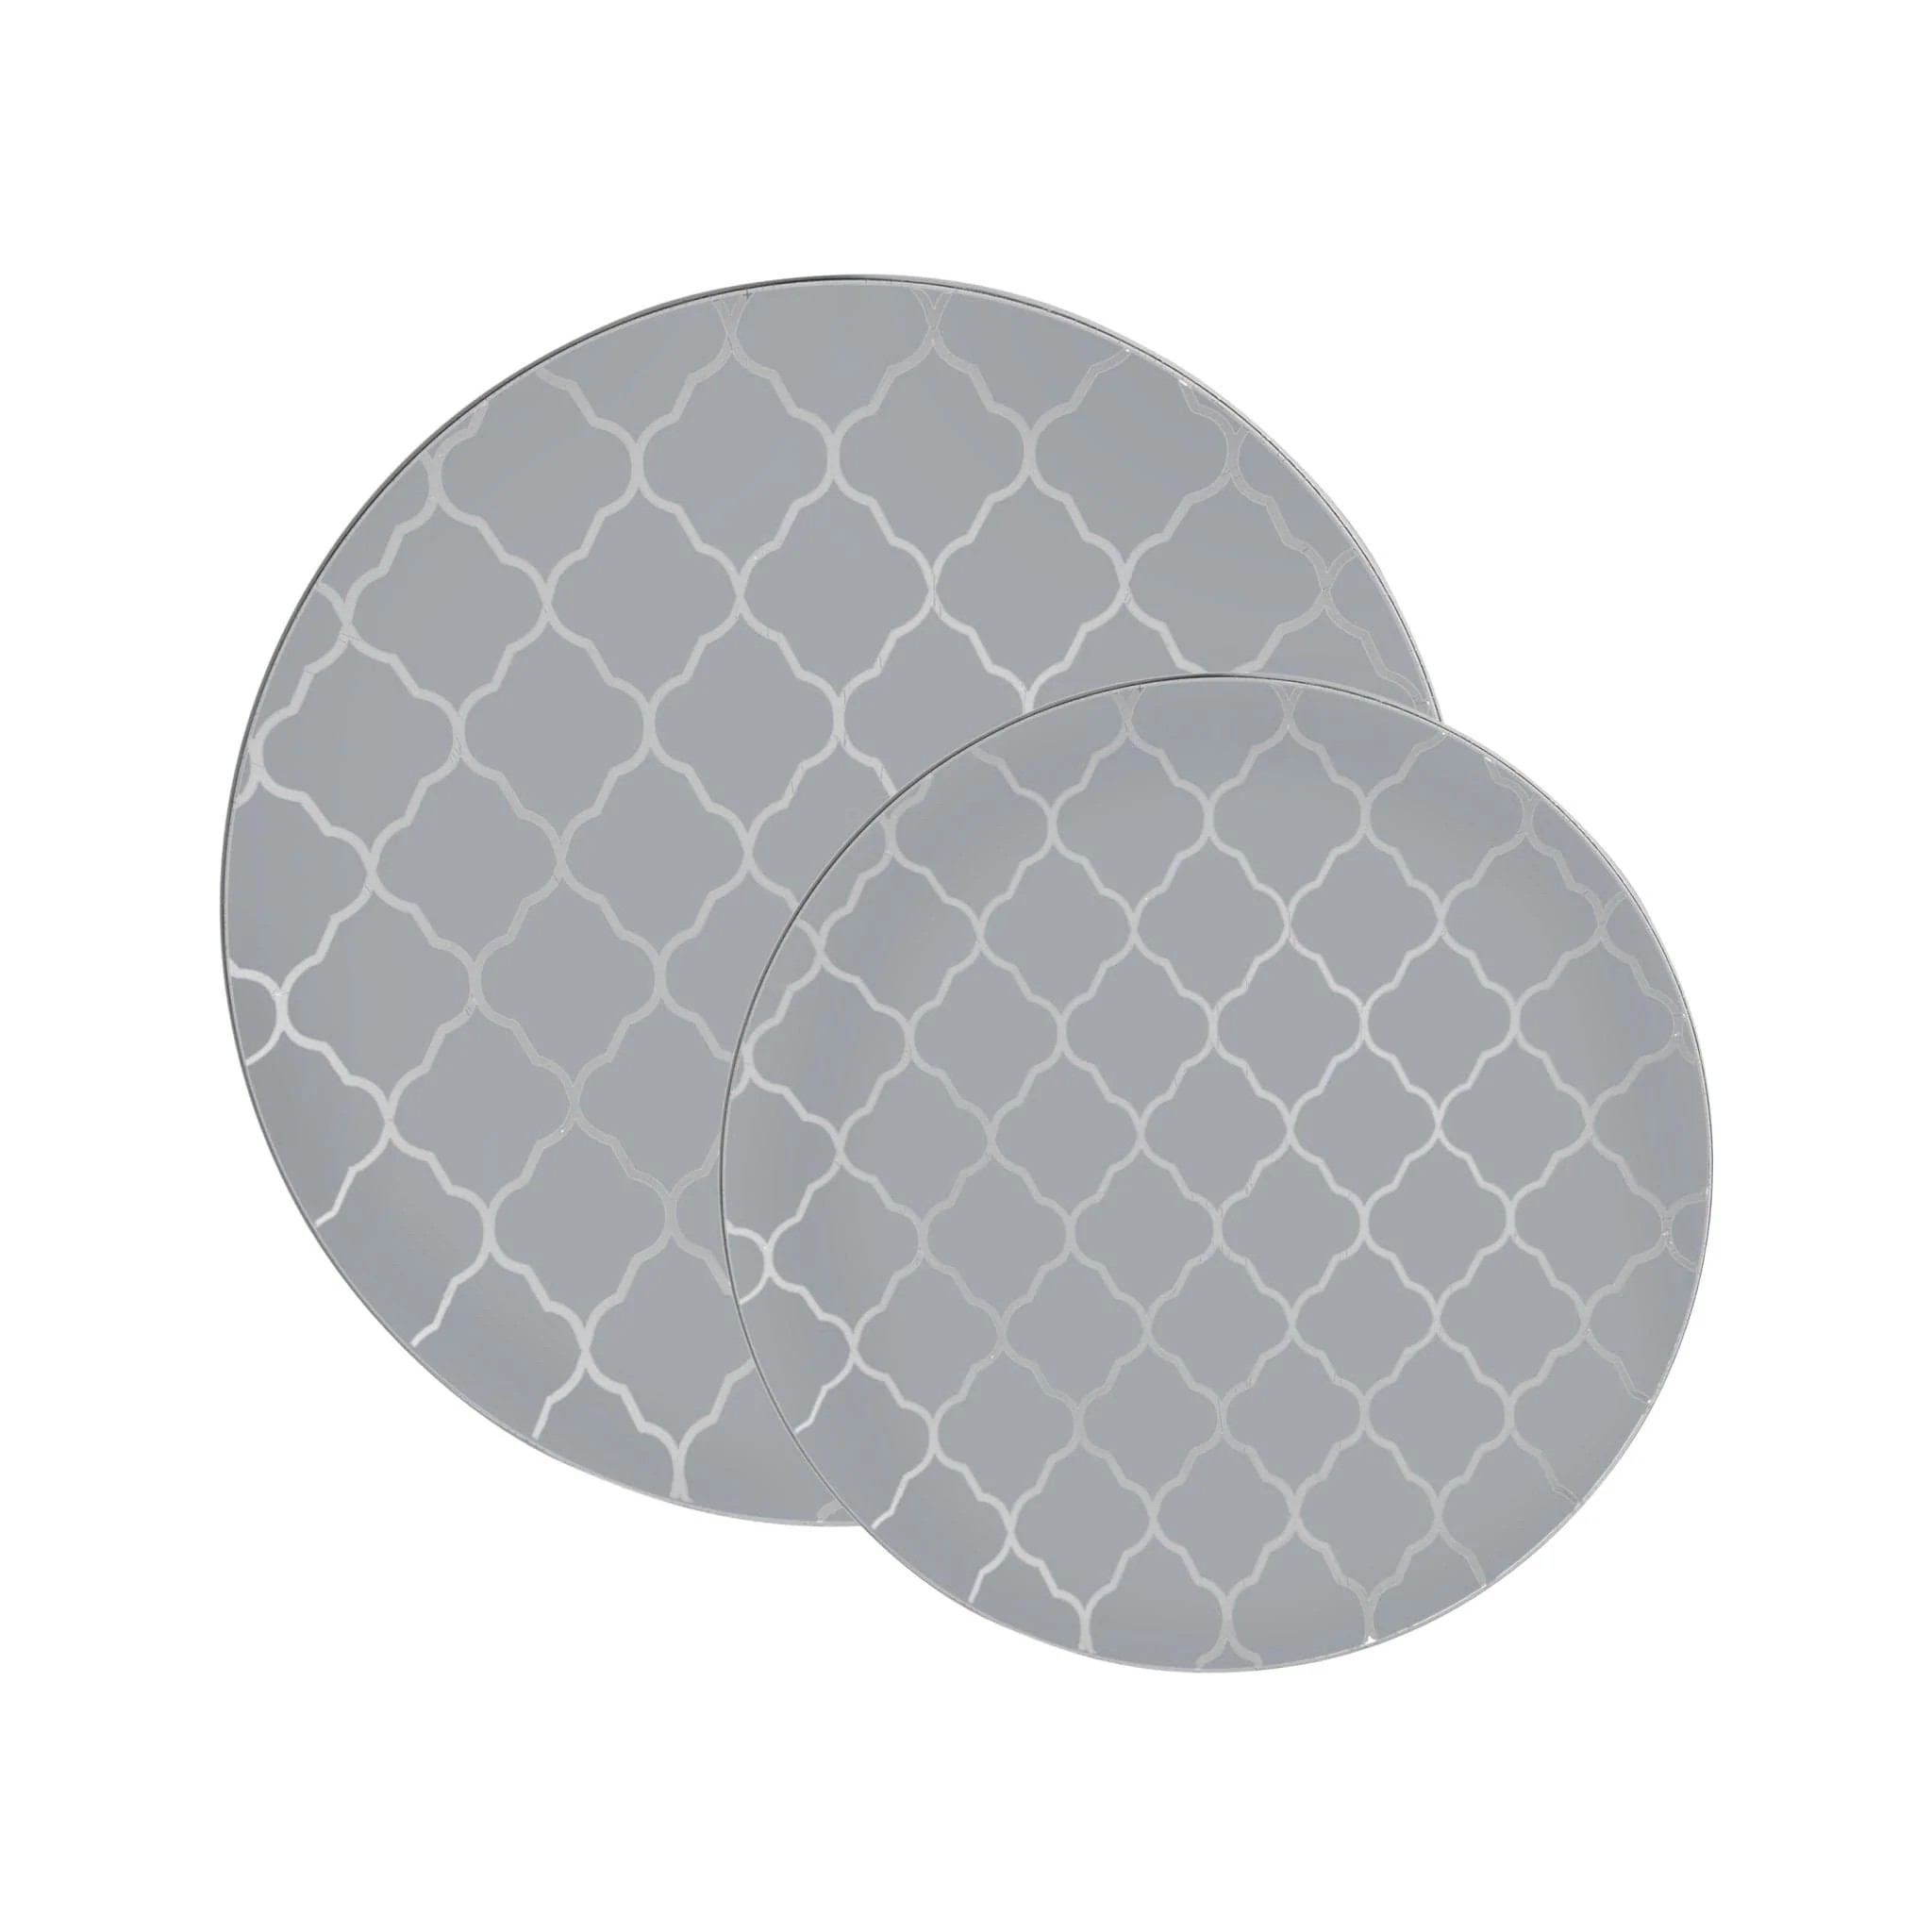 Luxe Party Gray with Silver Lattice Pattern Plastic Appetizer Plate 7.25